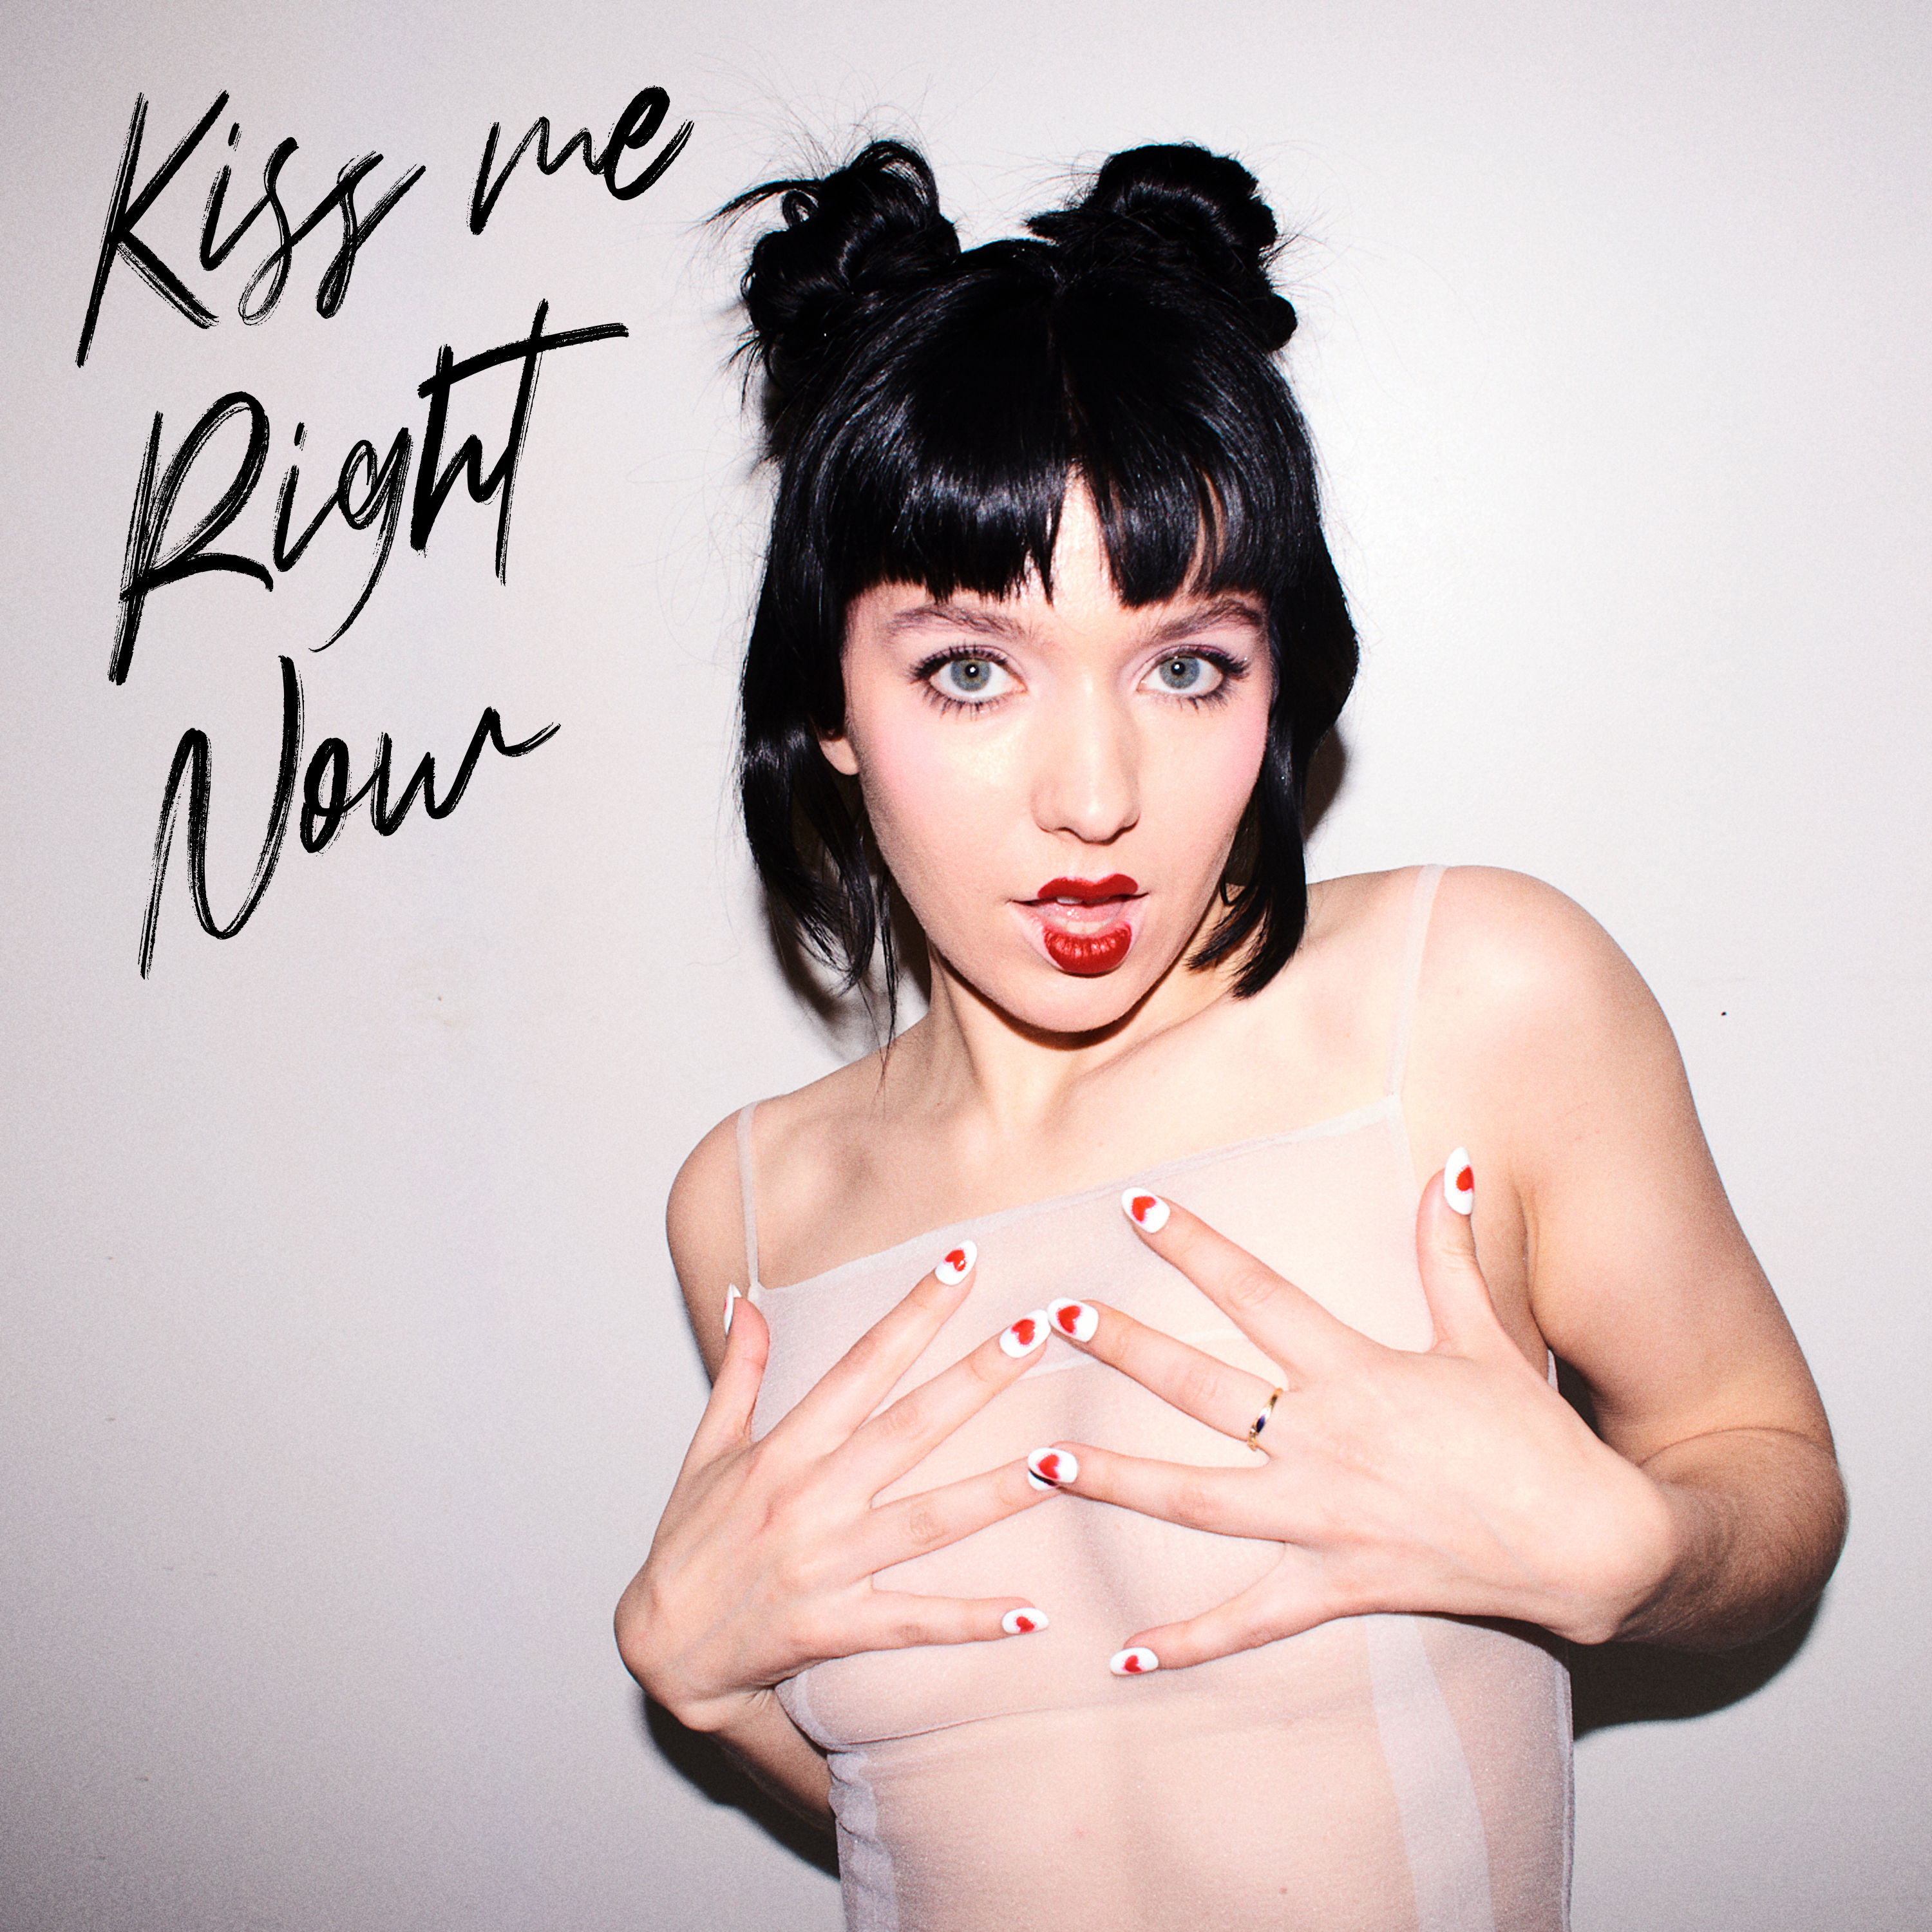 TATYANA shares the new song, “Kiss Me Right Now” ahead of her album release